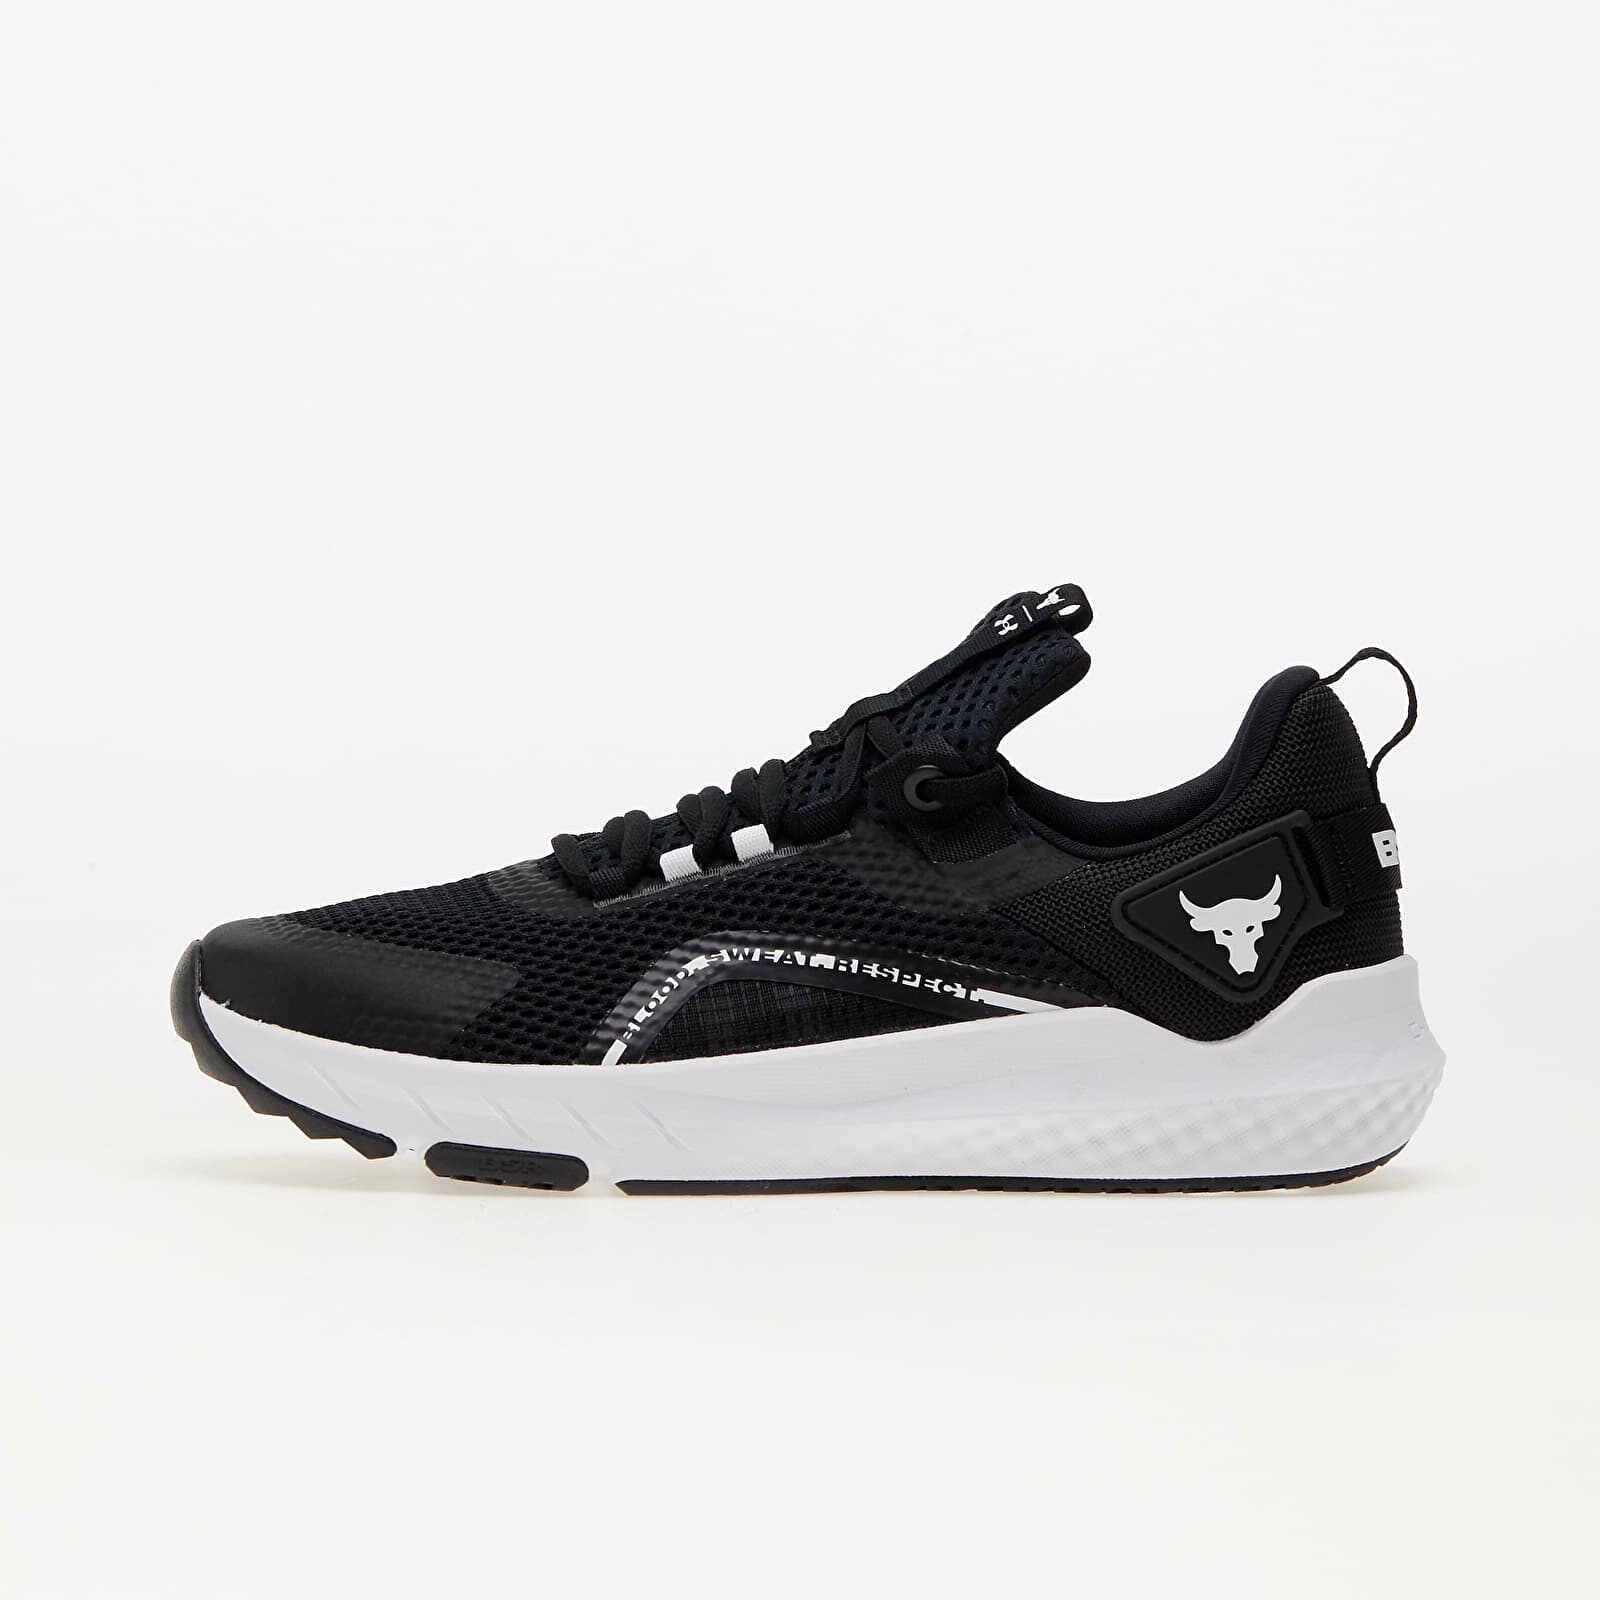 Under Armour Project Rock BSR 3 Black